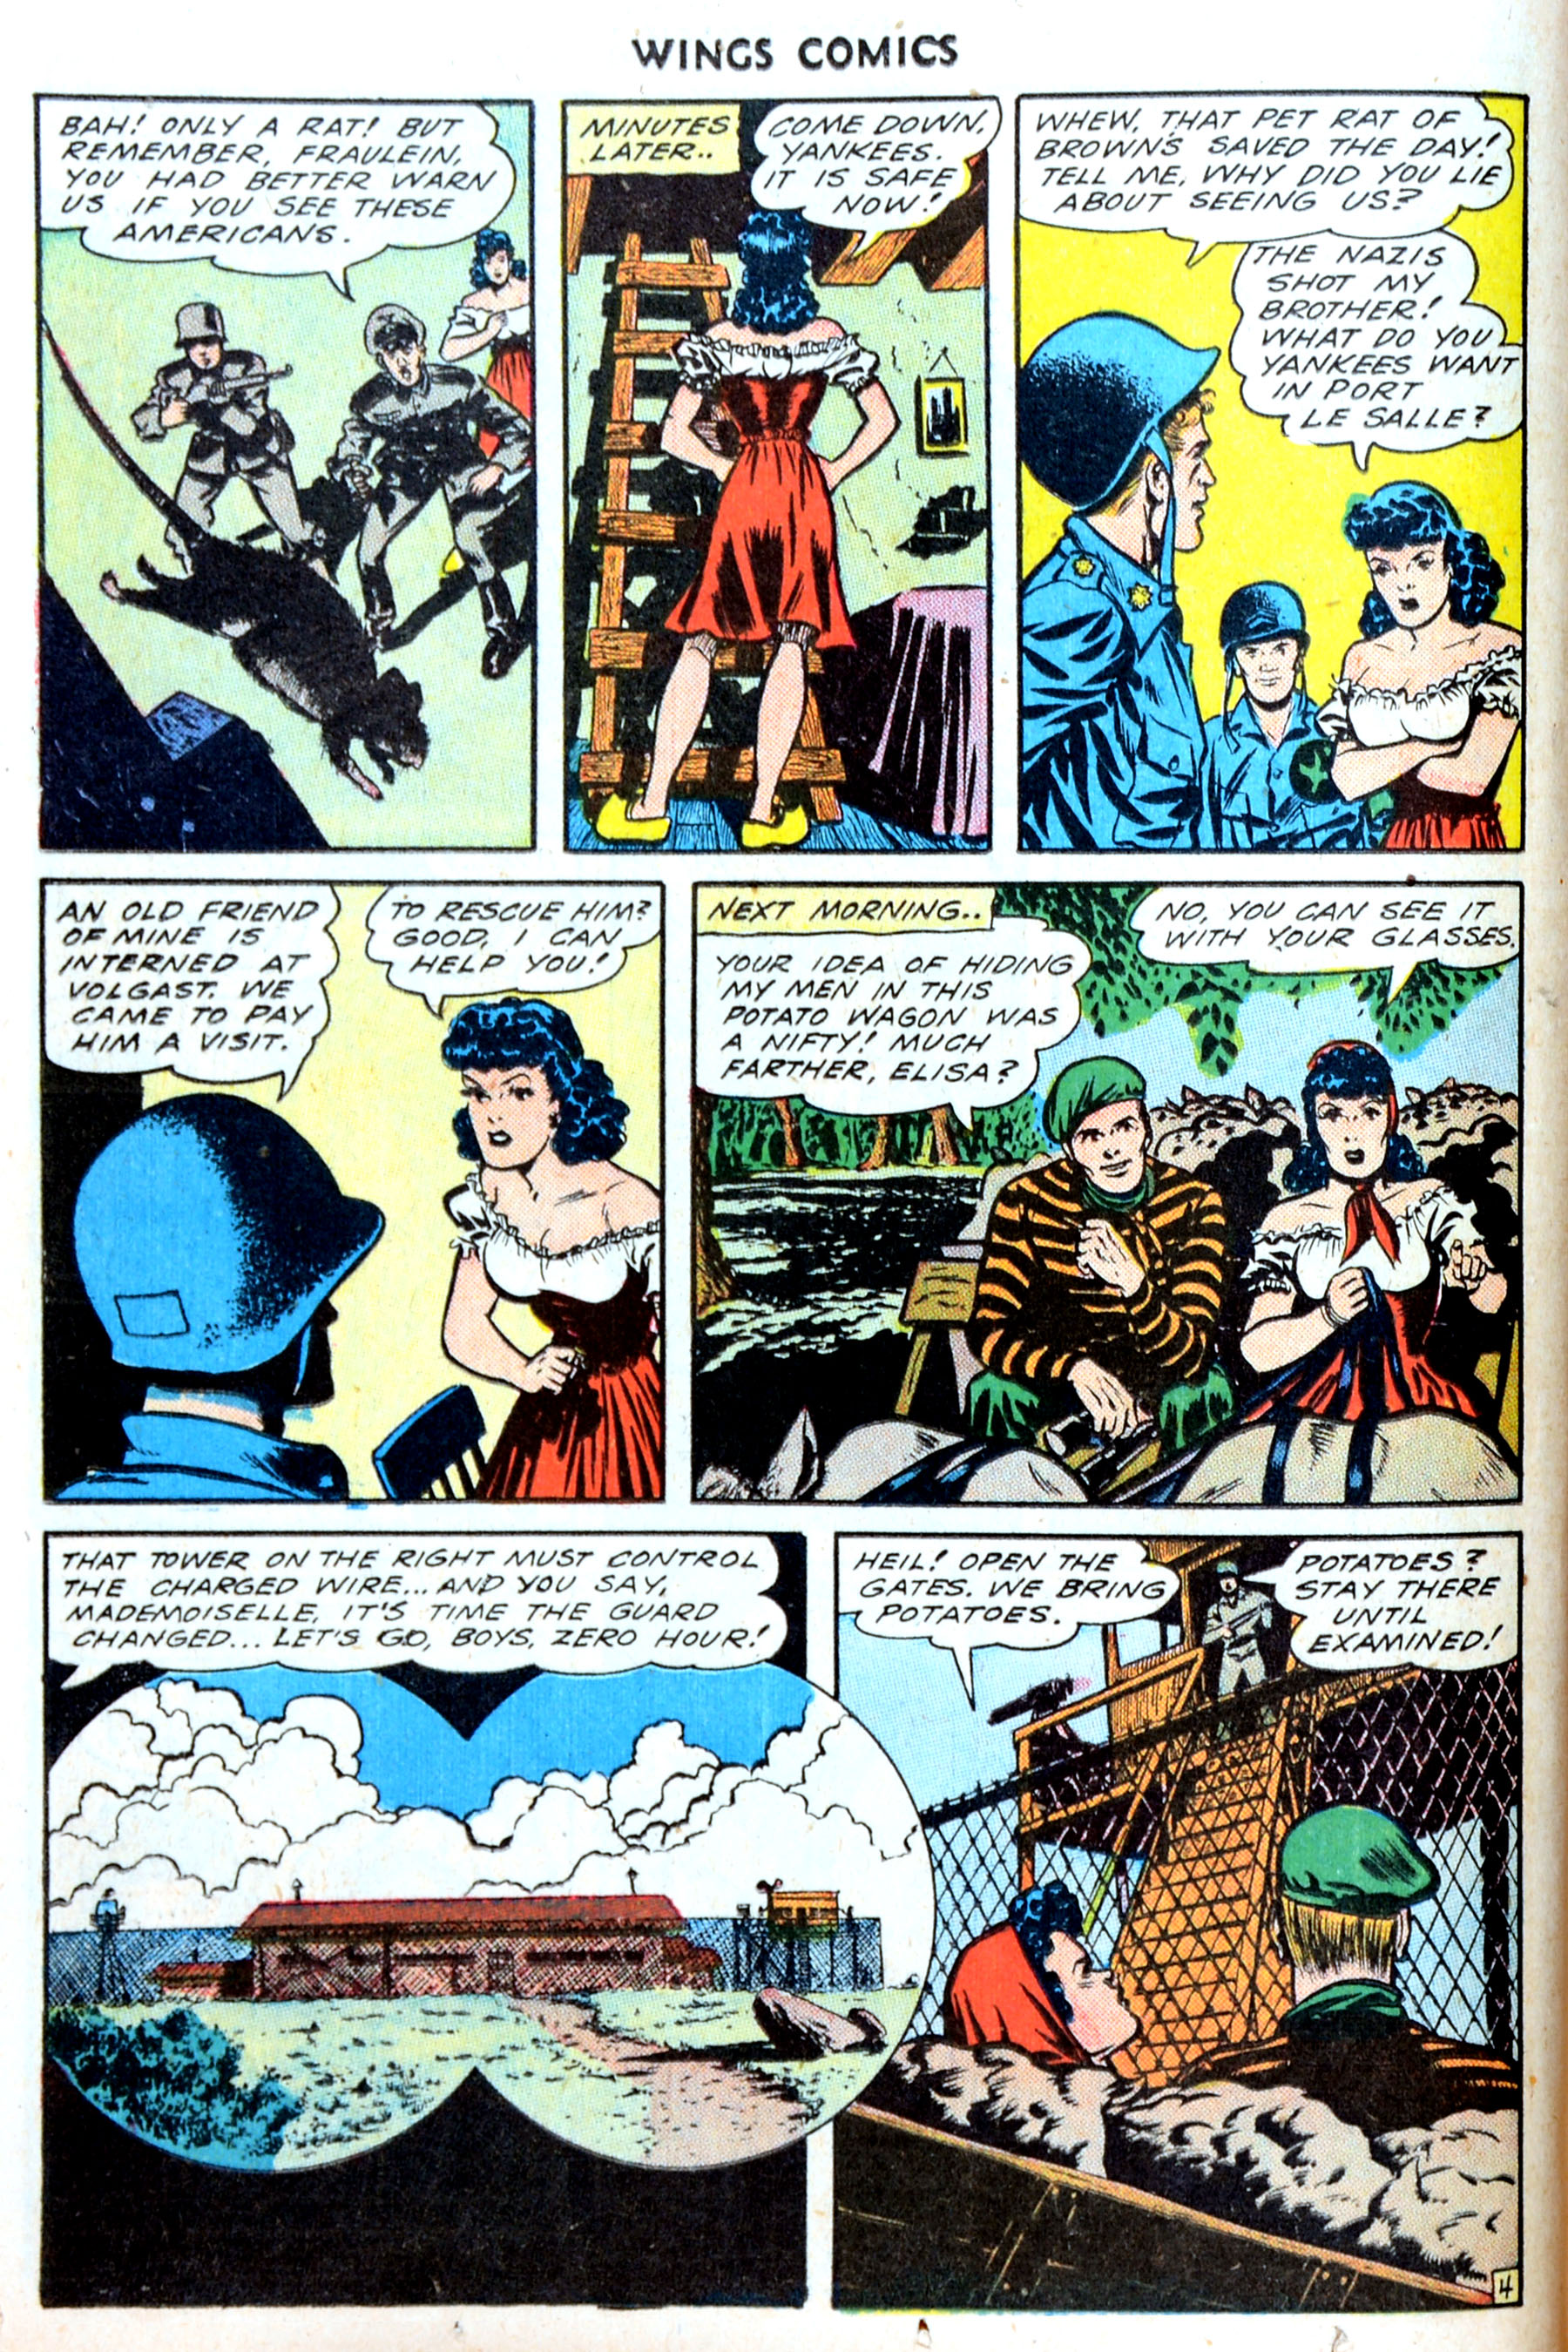 Read online Wings Comics comic -  Issue #47 - 24